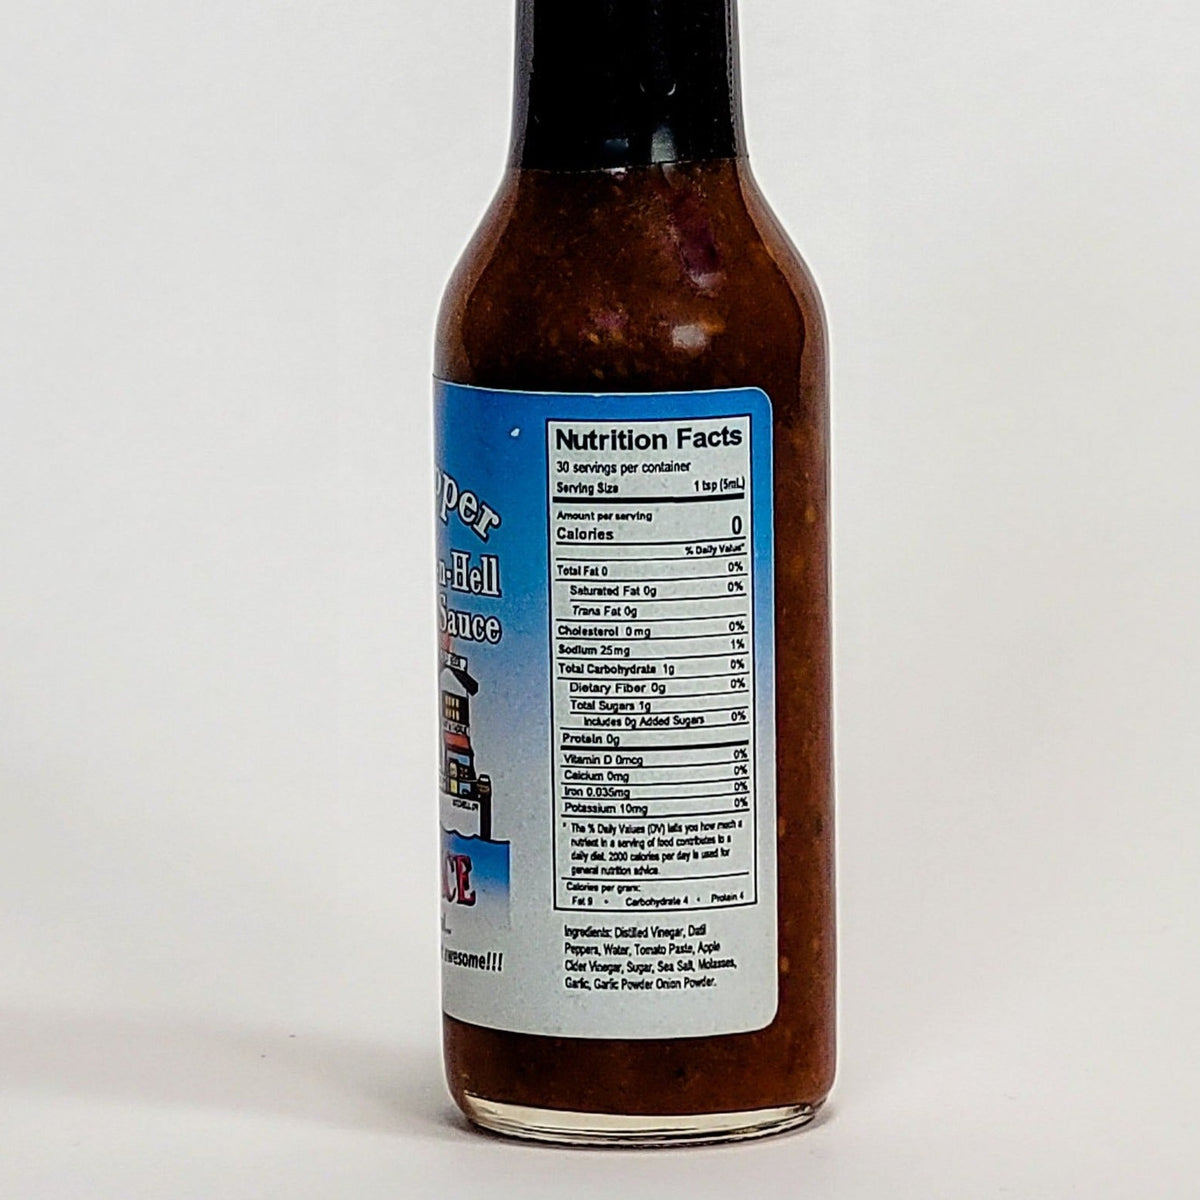 dats nice hotter than hell datil pepper sauce nutrition facts